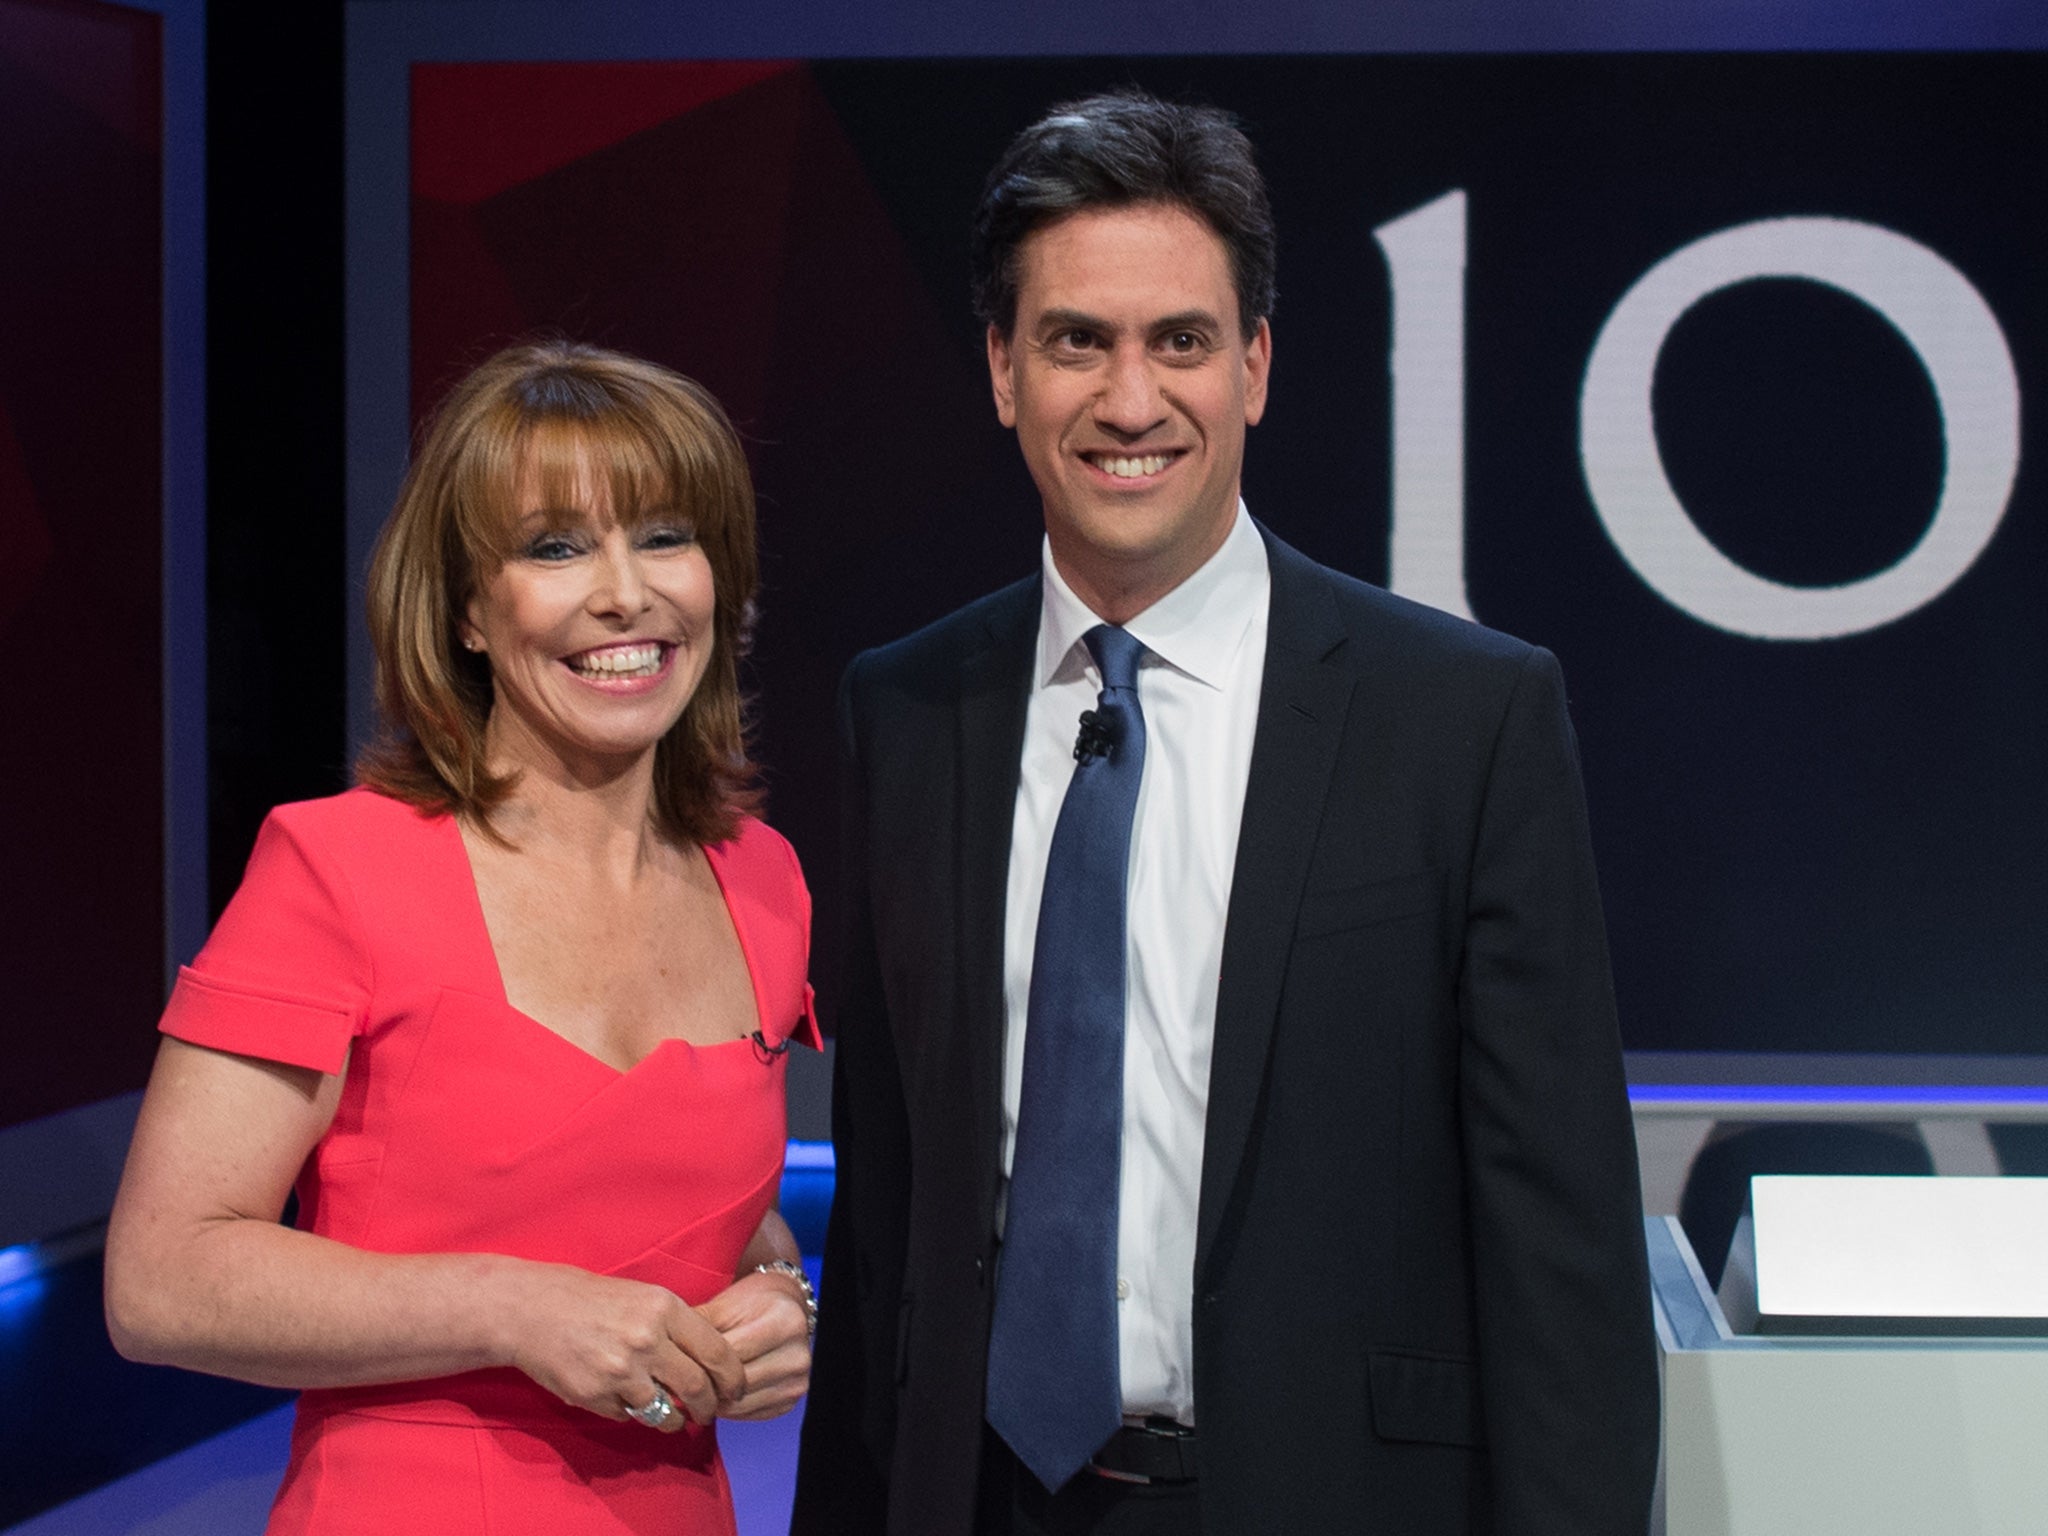 Miliband’s success means that expectations will be higher when he appears in the seven-way televised debate